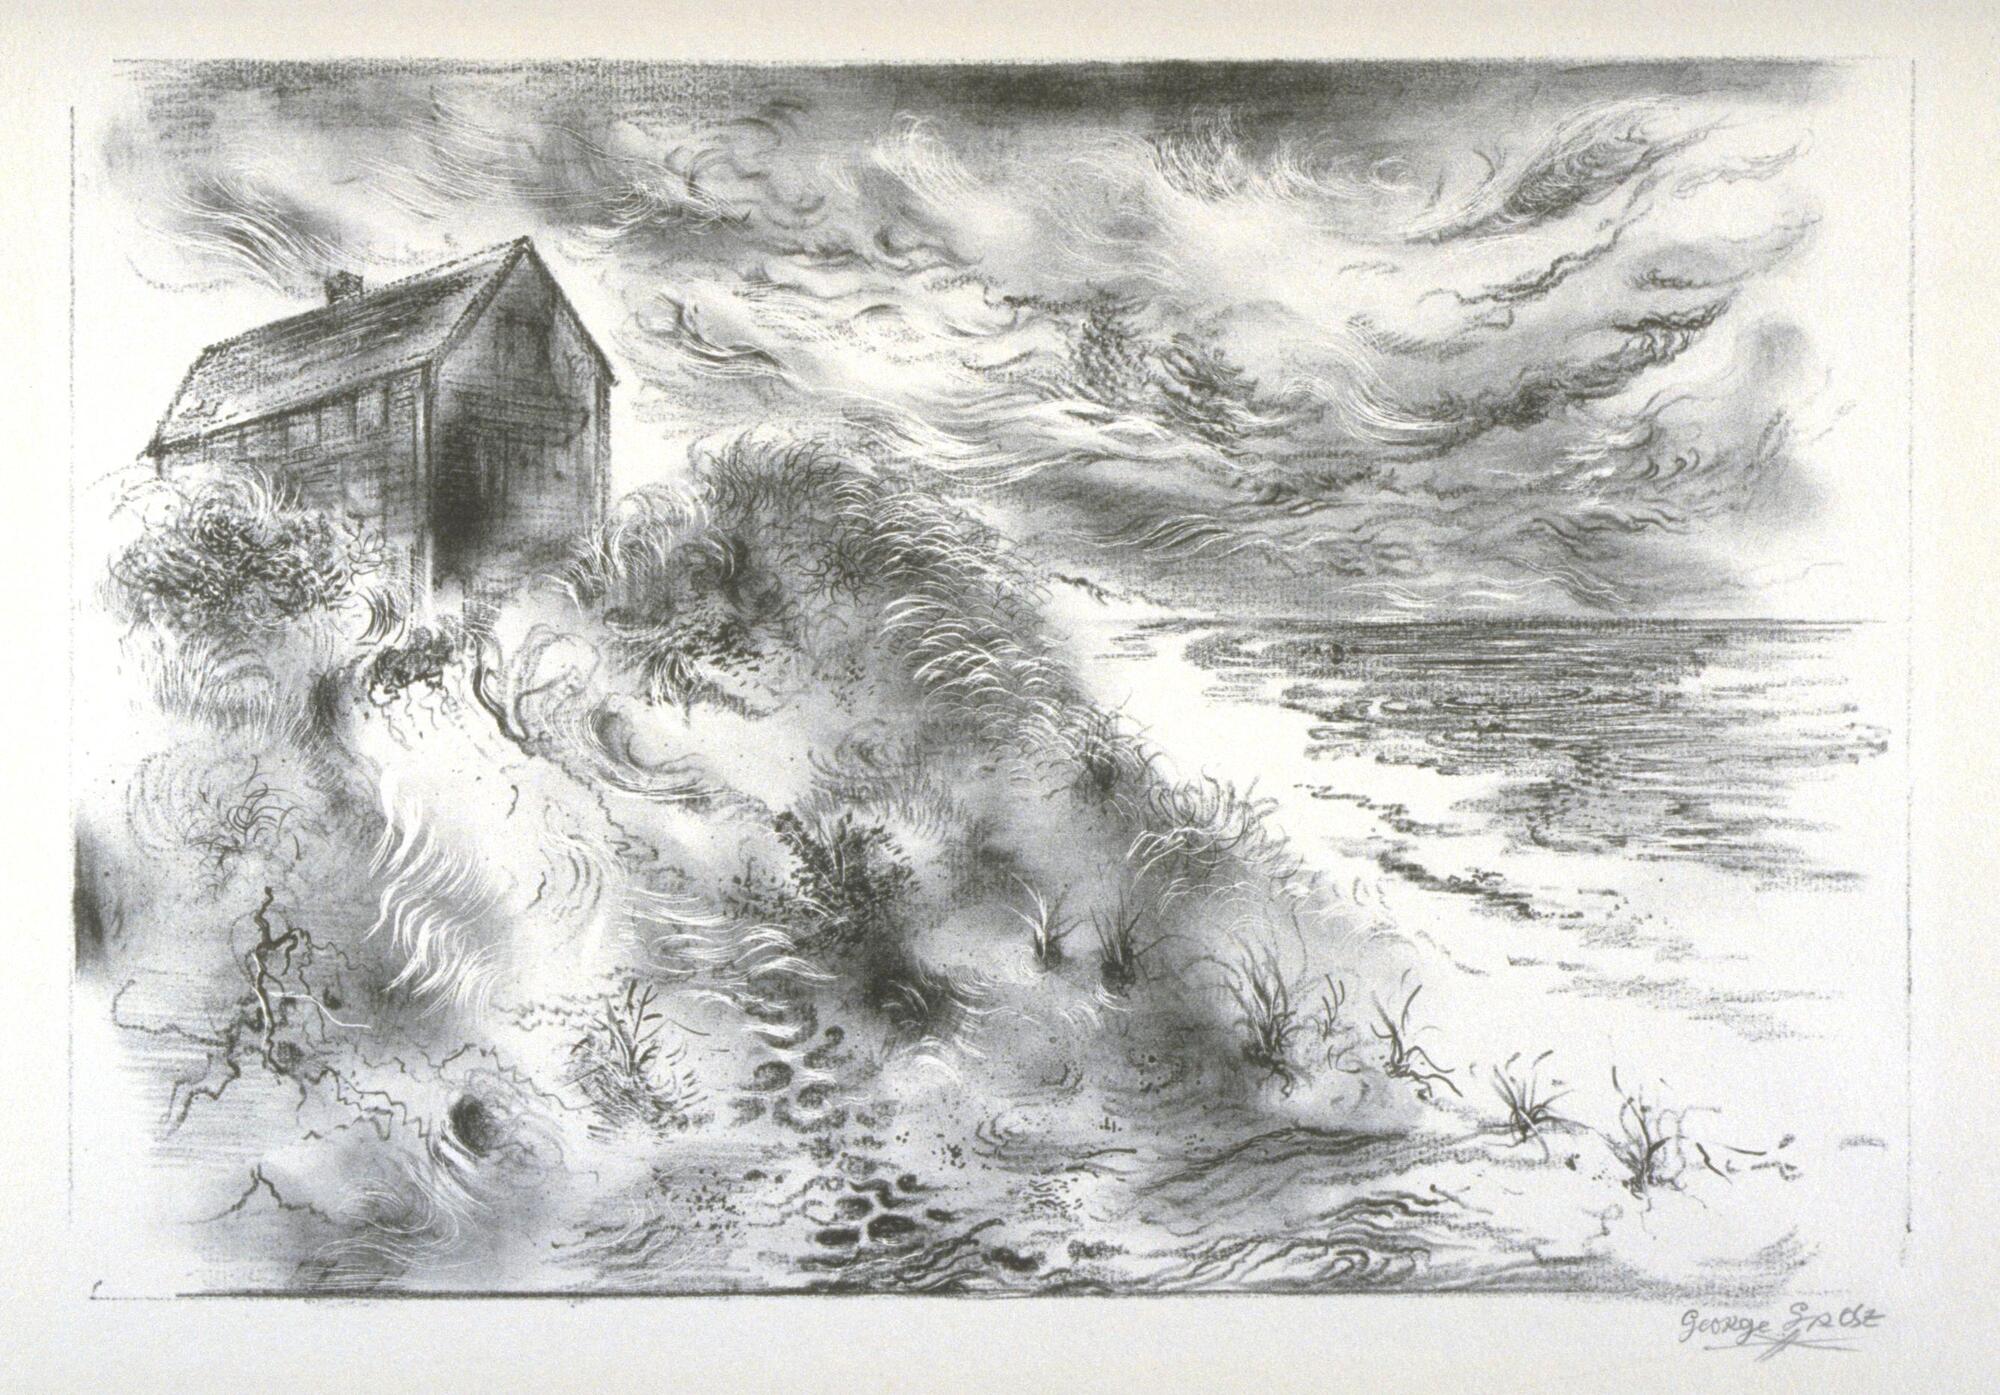 In the top left corner a house lies on top of a hill of sand dunes covered with grasses, with the ocean to the right and storm clouds swirling overhead